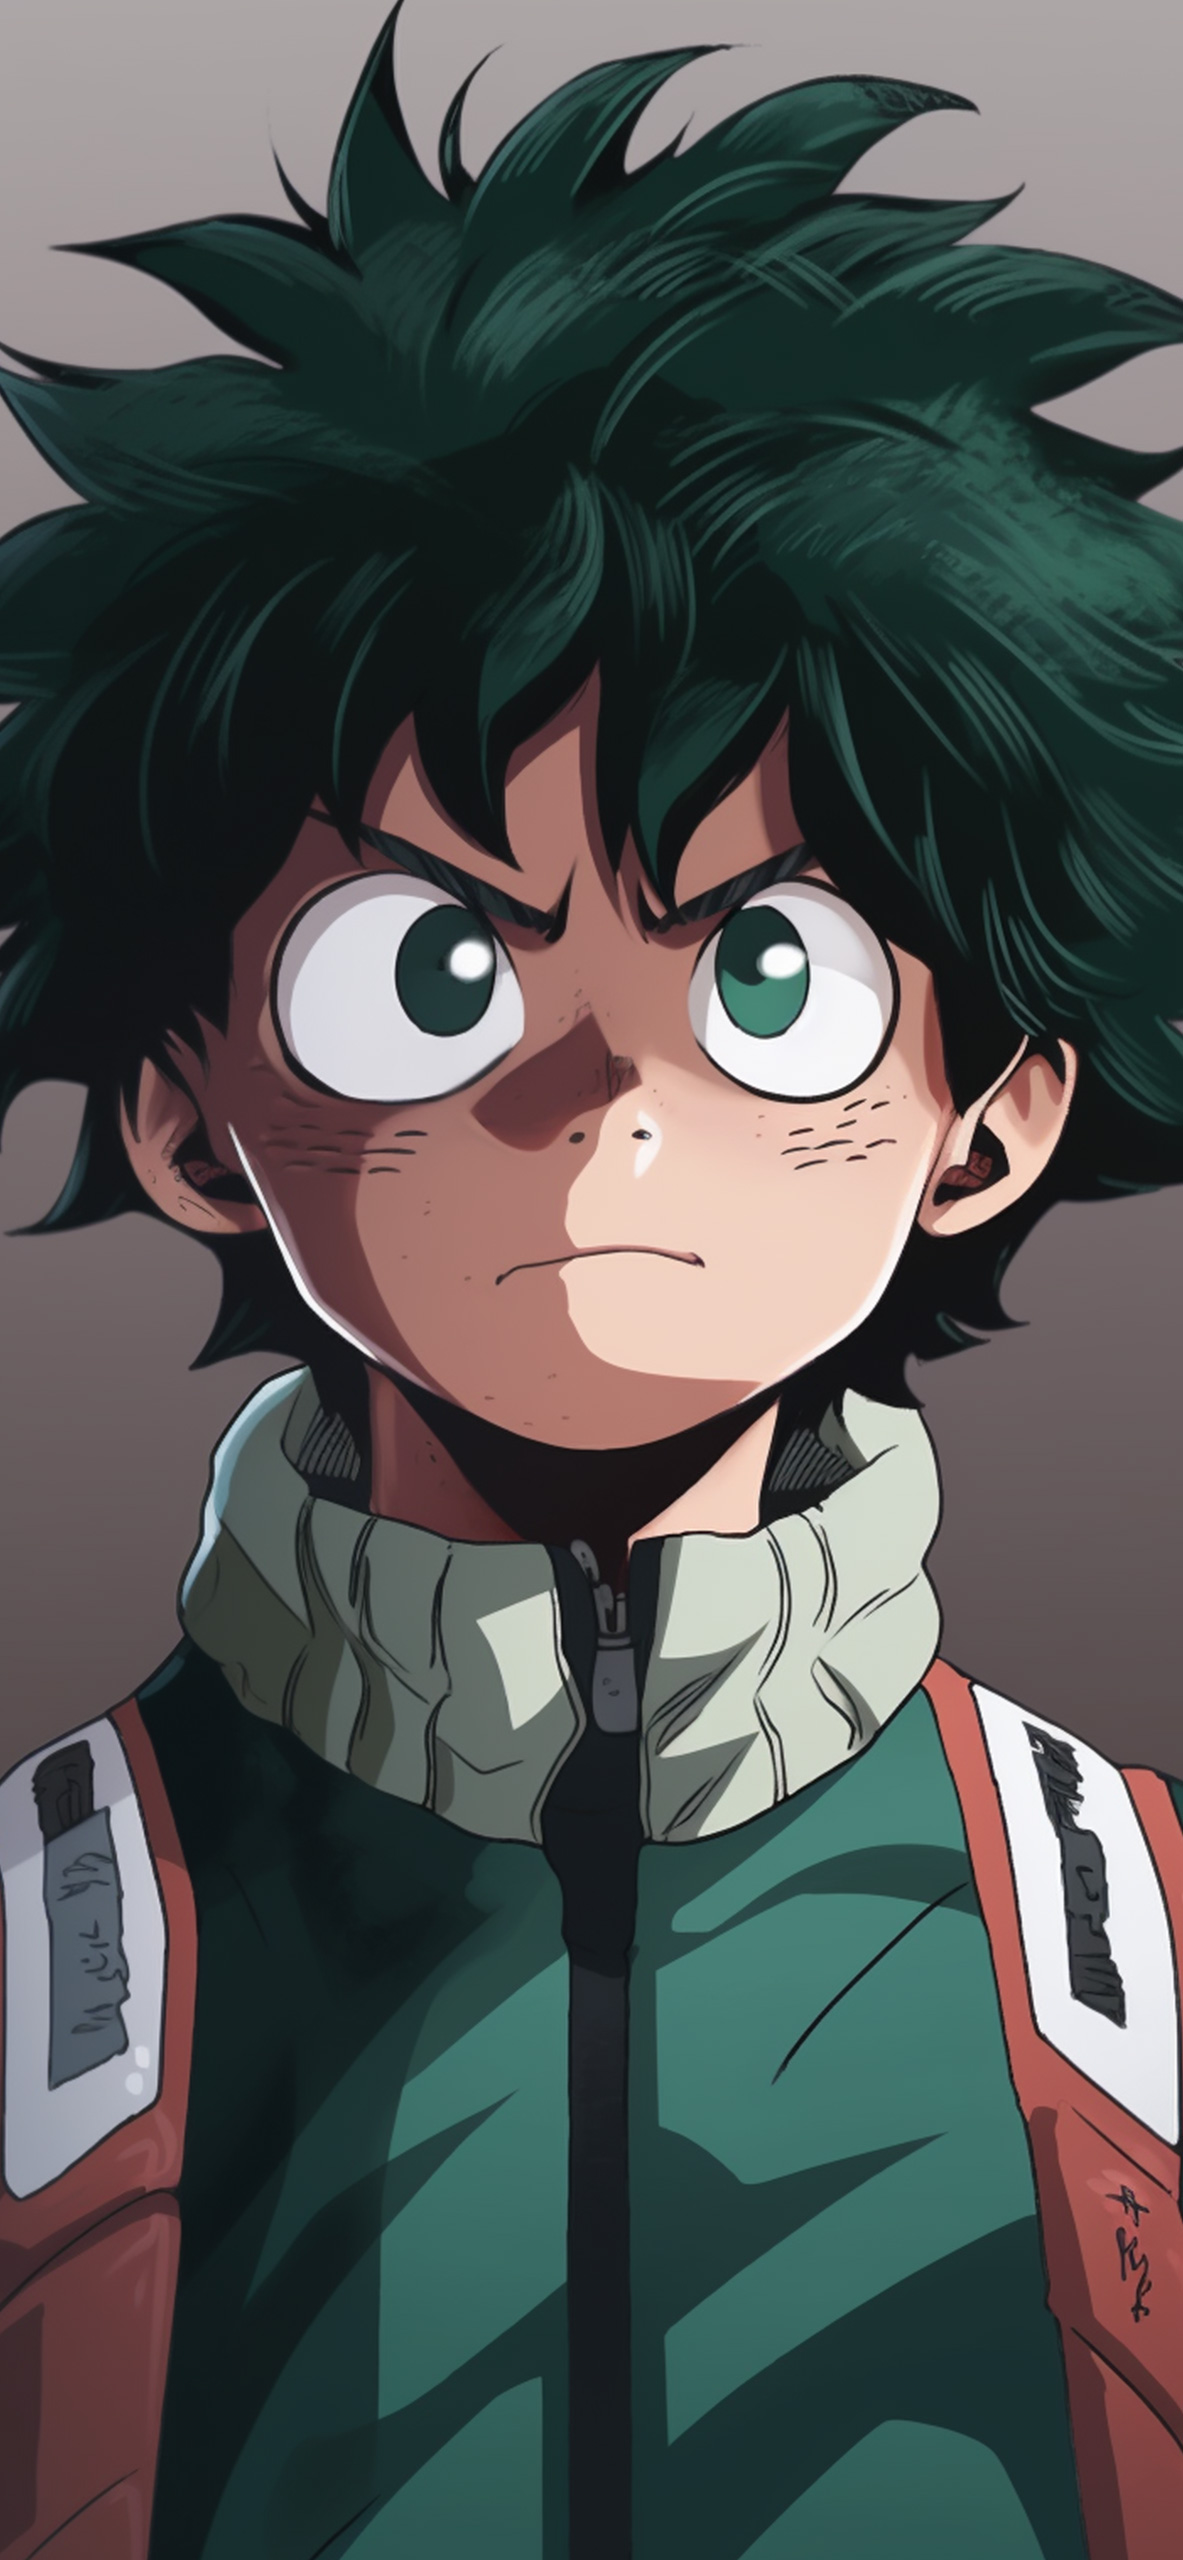 angie clinton recommends show me a picture of deku from my hero academia pic